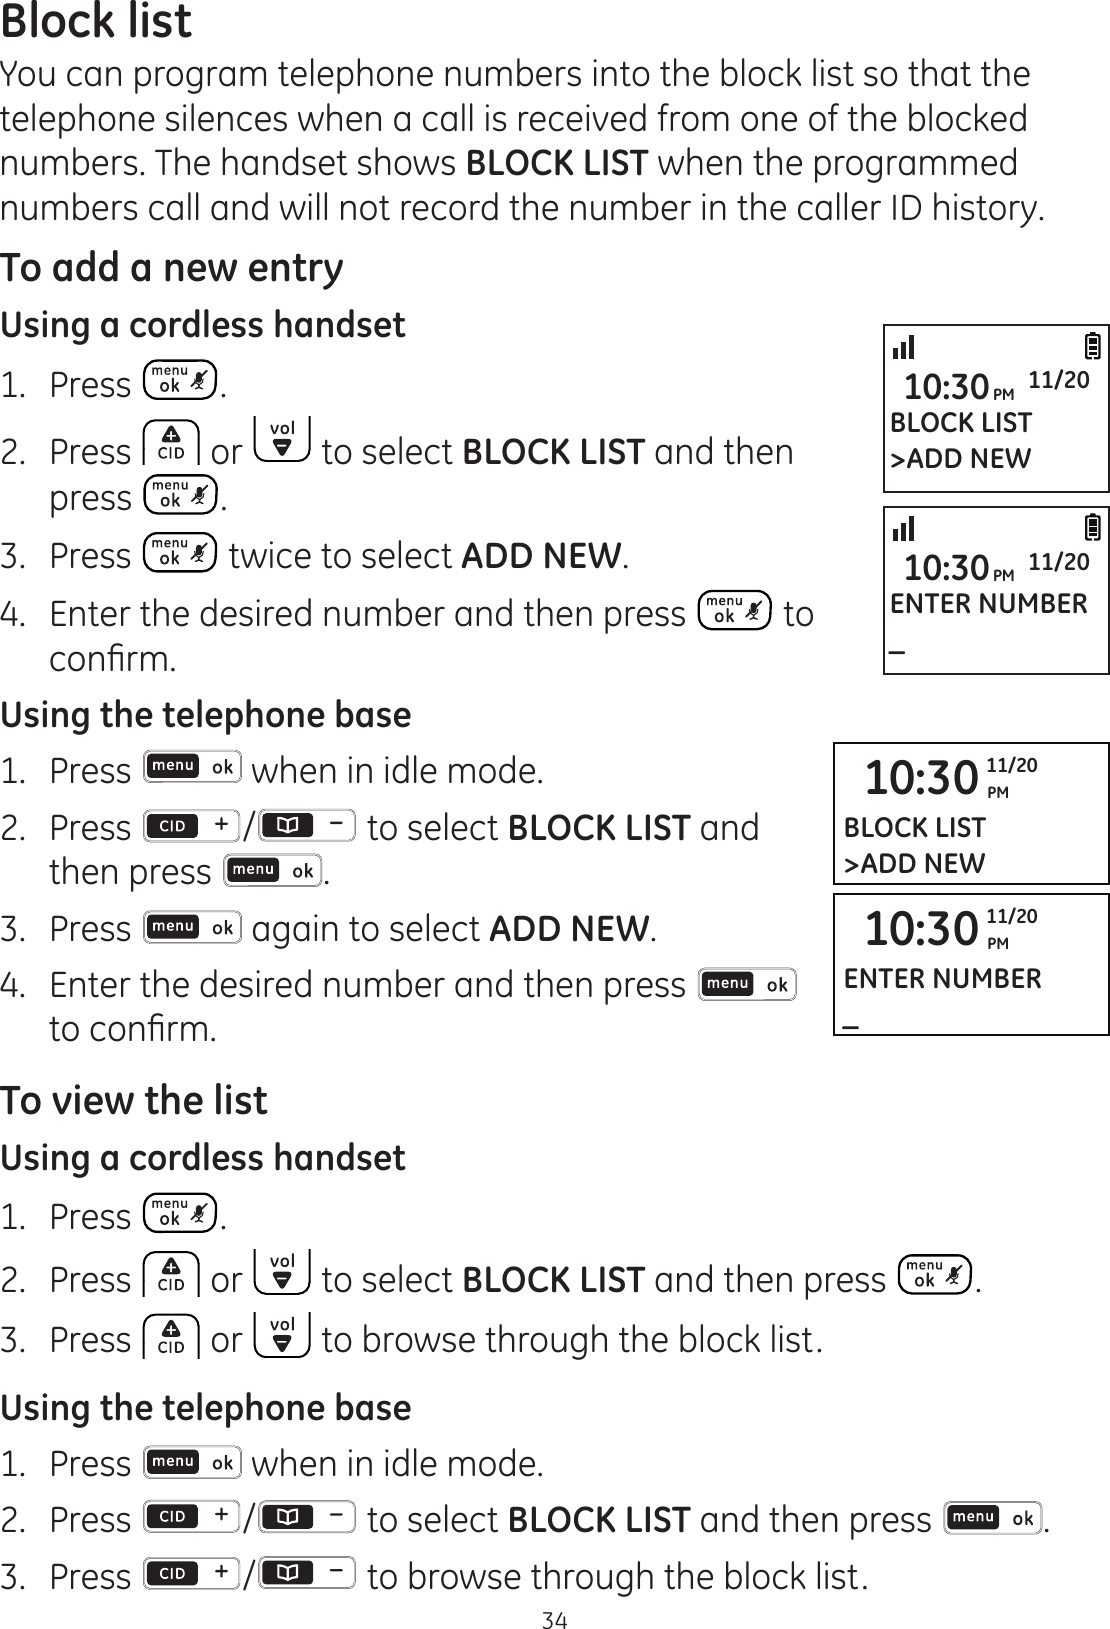 34Block listYou can program telephone numbers into the block list so that the telephone silences when a call is received from one of the blocked numbers. The handset shows BLOCK LIST when the programmed numbers call and will not record the number in the caller ID history.   To add a new entryUsing a cordless handset1.   Press . 2.  Press   or   to select BLOCK LIST and then press  .3.  Press   twice to select ADD NEW.4.  Enter the desired number and then press   to FRQ¿UPUsing the telephone base1.  Press   when in idle mode. 2.   Press  /  to select BLOCK LIST and then press  .3.  Press   again to select ADD NEW. 4.  Enter the desired number and then press   WRFRQ¿UPTo view the listUsing a cordless handset1.   Press  . 2.  Press   or   to select BLOCK LIST and then press  .3.   Press   or   to browse through the block list. Using the telephone base1.  Press   when in idle mode. 2.   Press  /  to select BLOCK LIST and then press  .3.  Press  /  to browse through the block list.BLOCK LIST&gt;ADD NEW10:30PM 11/20ENTER NUMBER_10:30PM 11/2010:30 PM11/20BLOCK LIST&gt;ADD NEW10:30 PM11/20ENTER NUMBER_